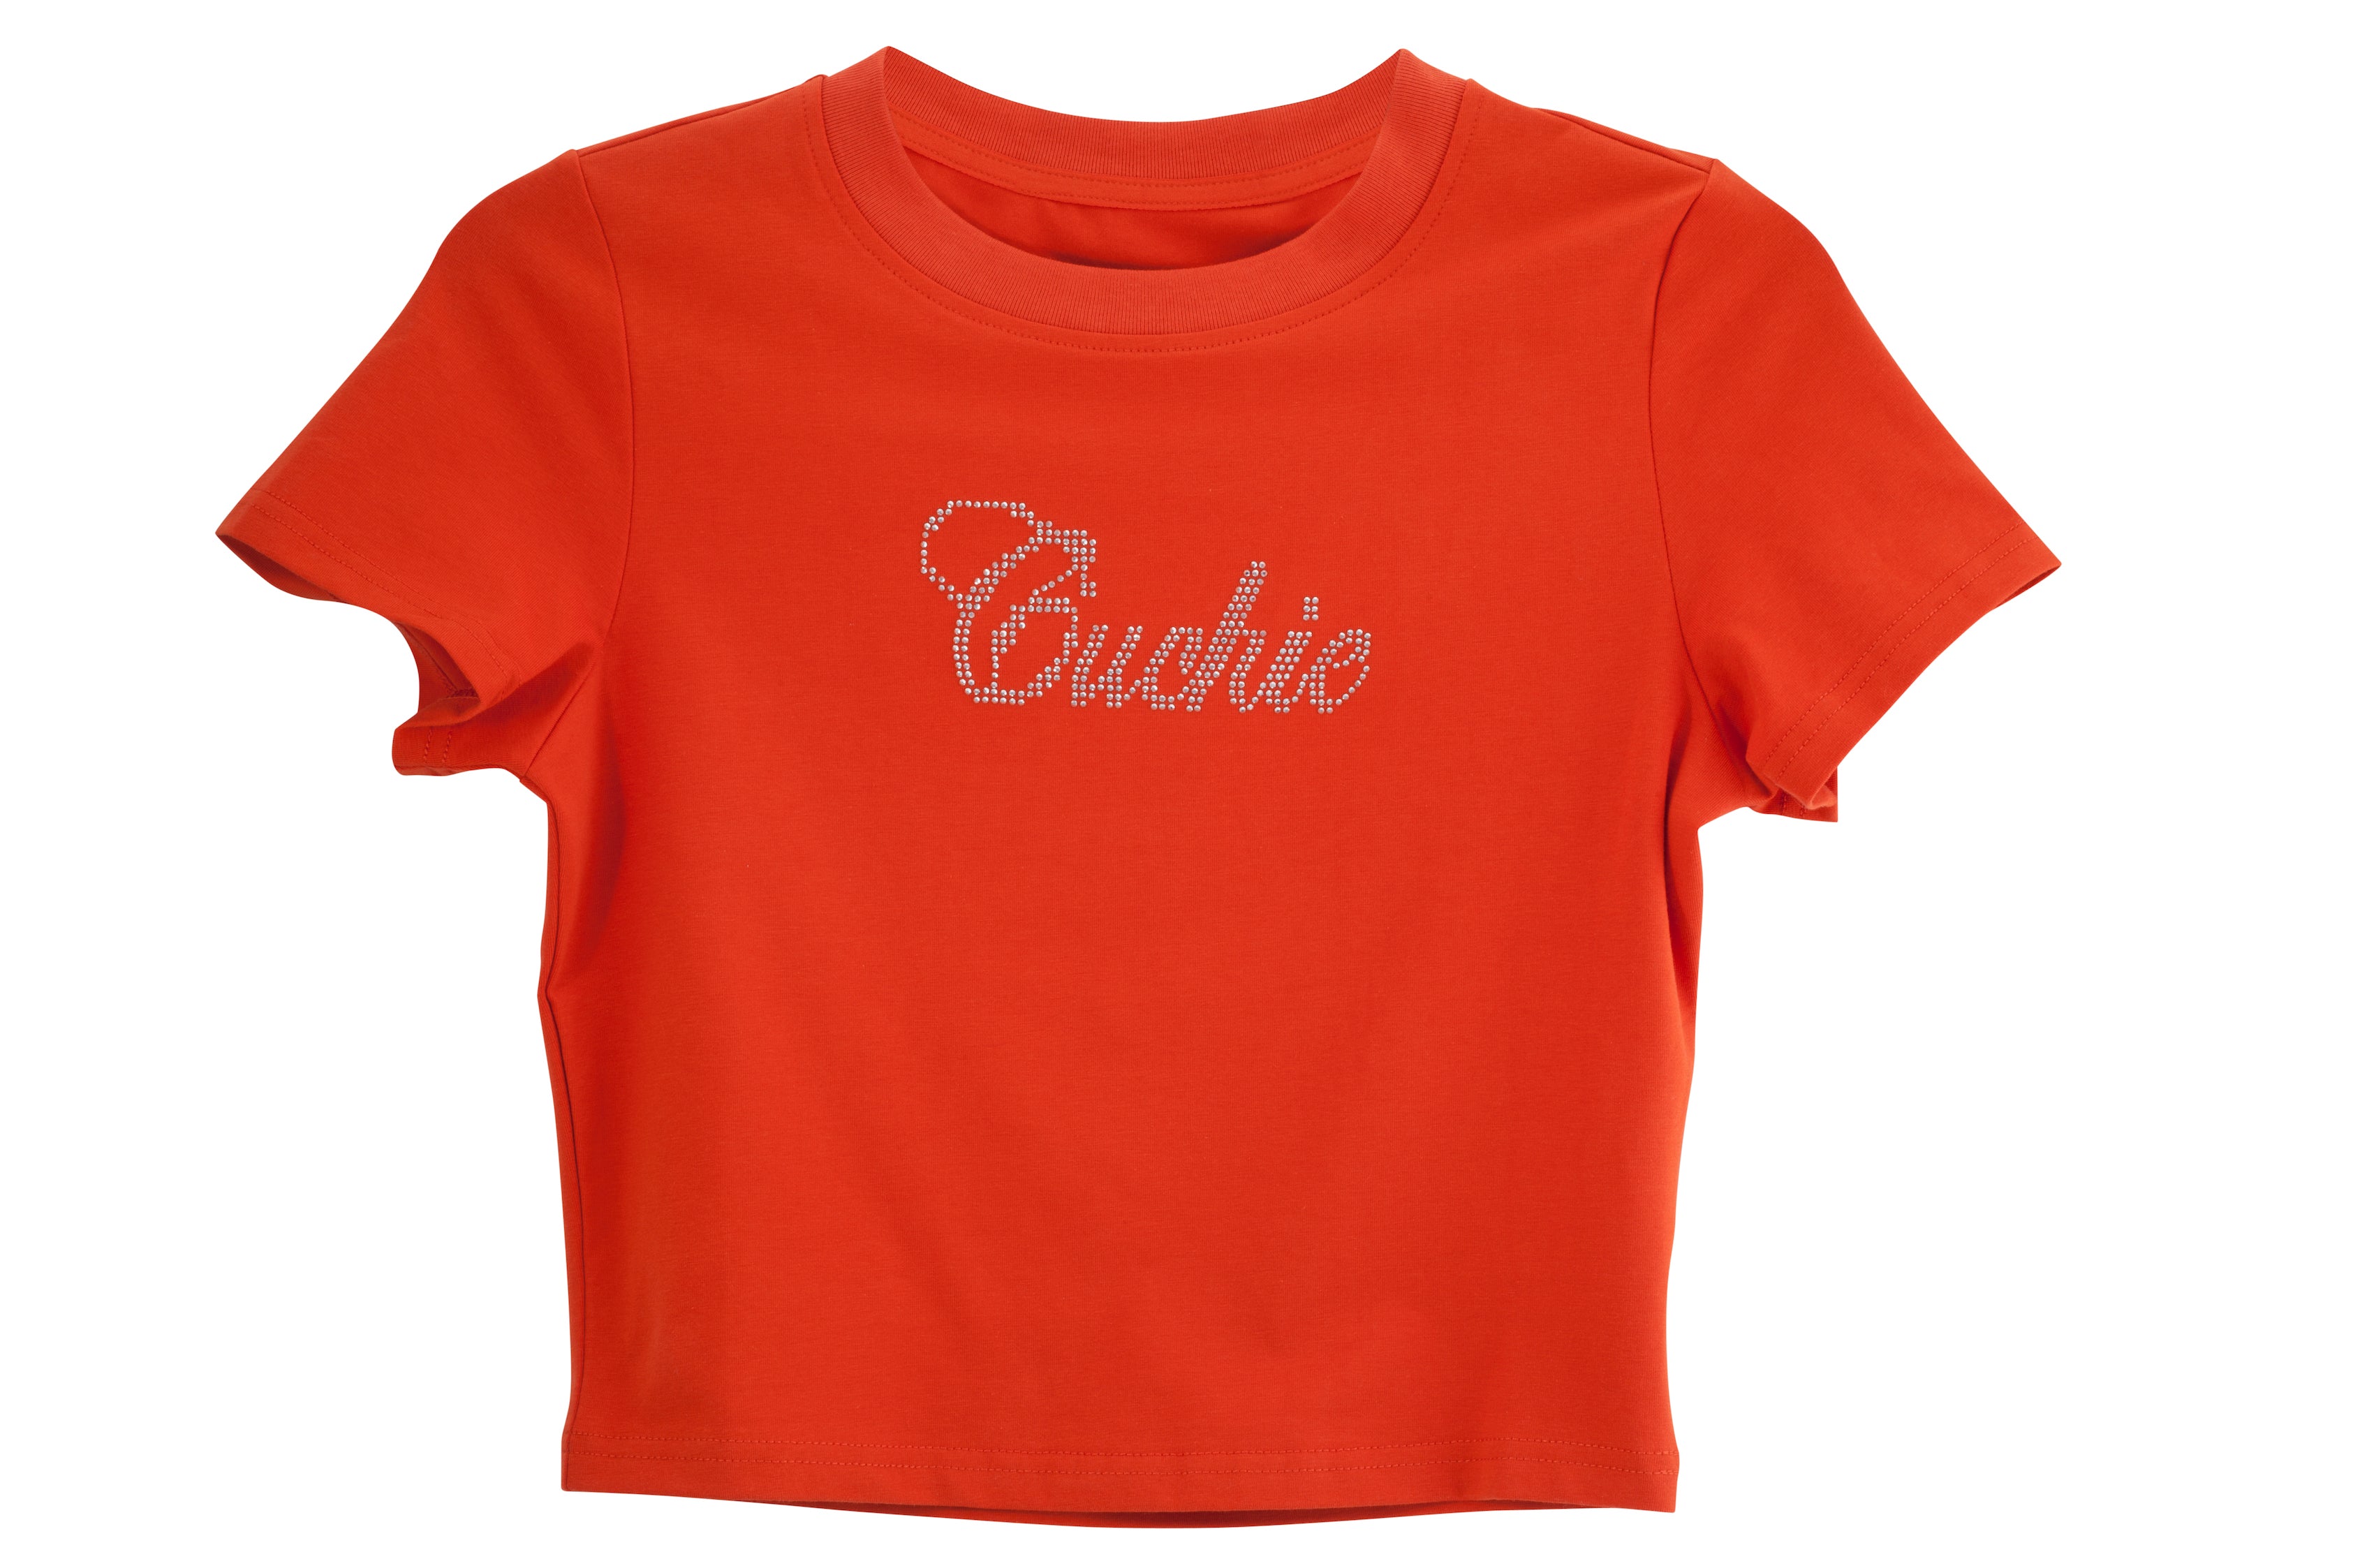 Amber cropped t-shirt with "Cuchie" text in rhinestones